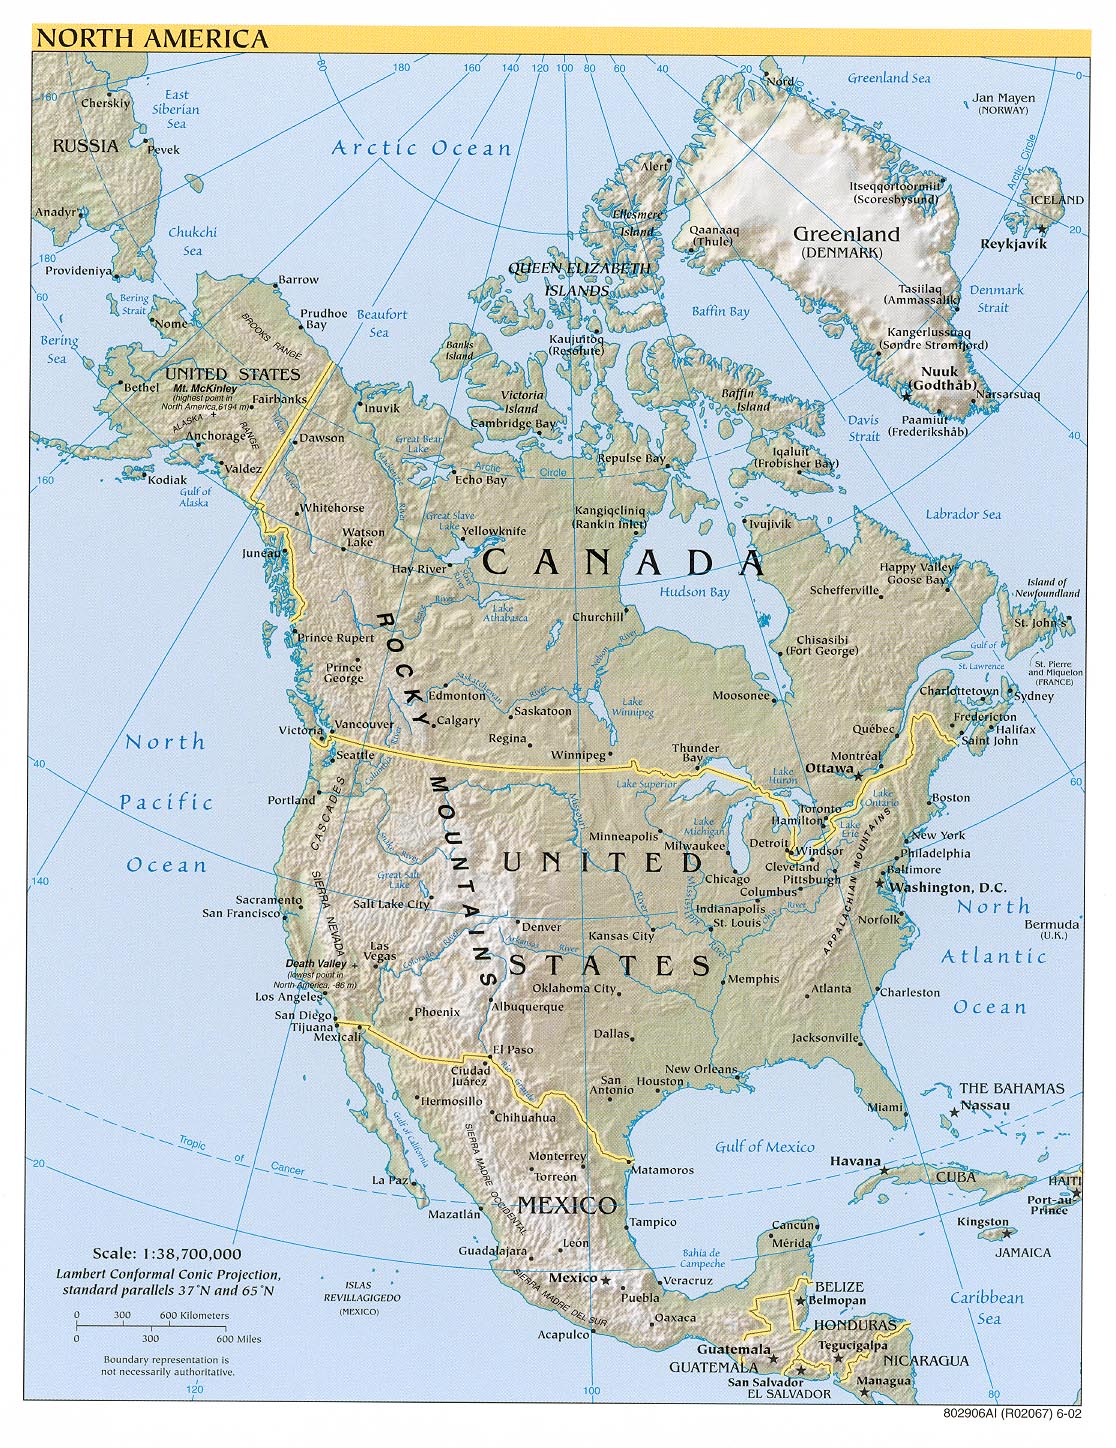 North America (Reference Map)